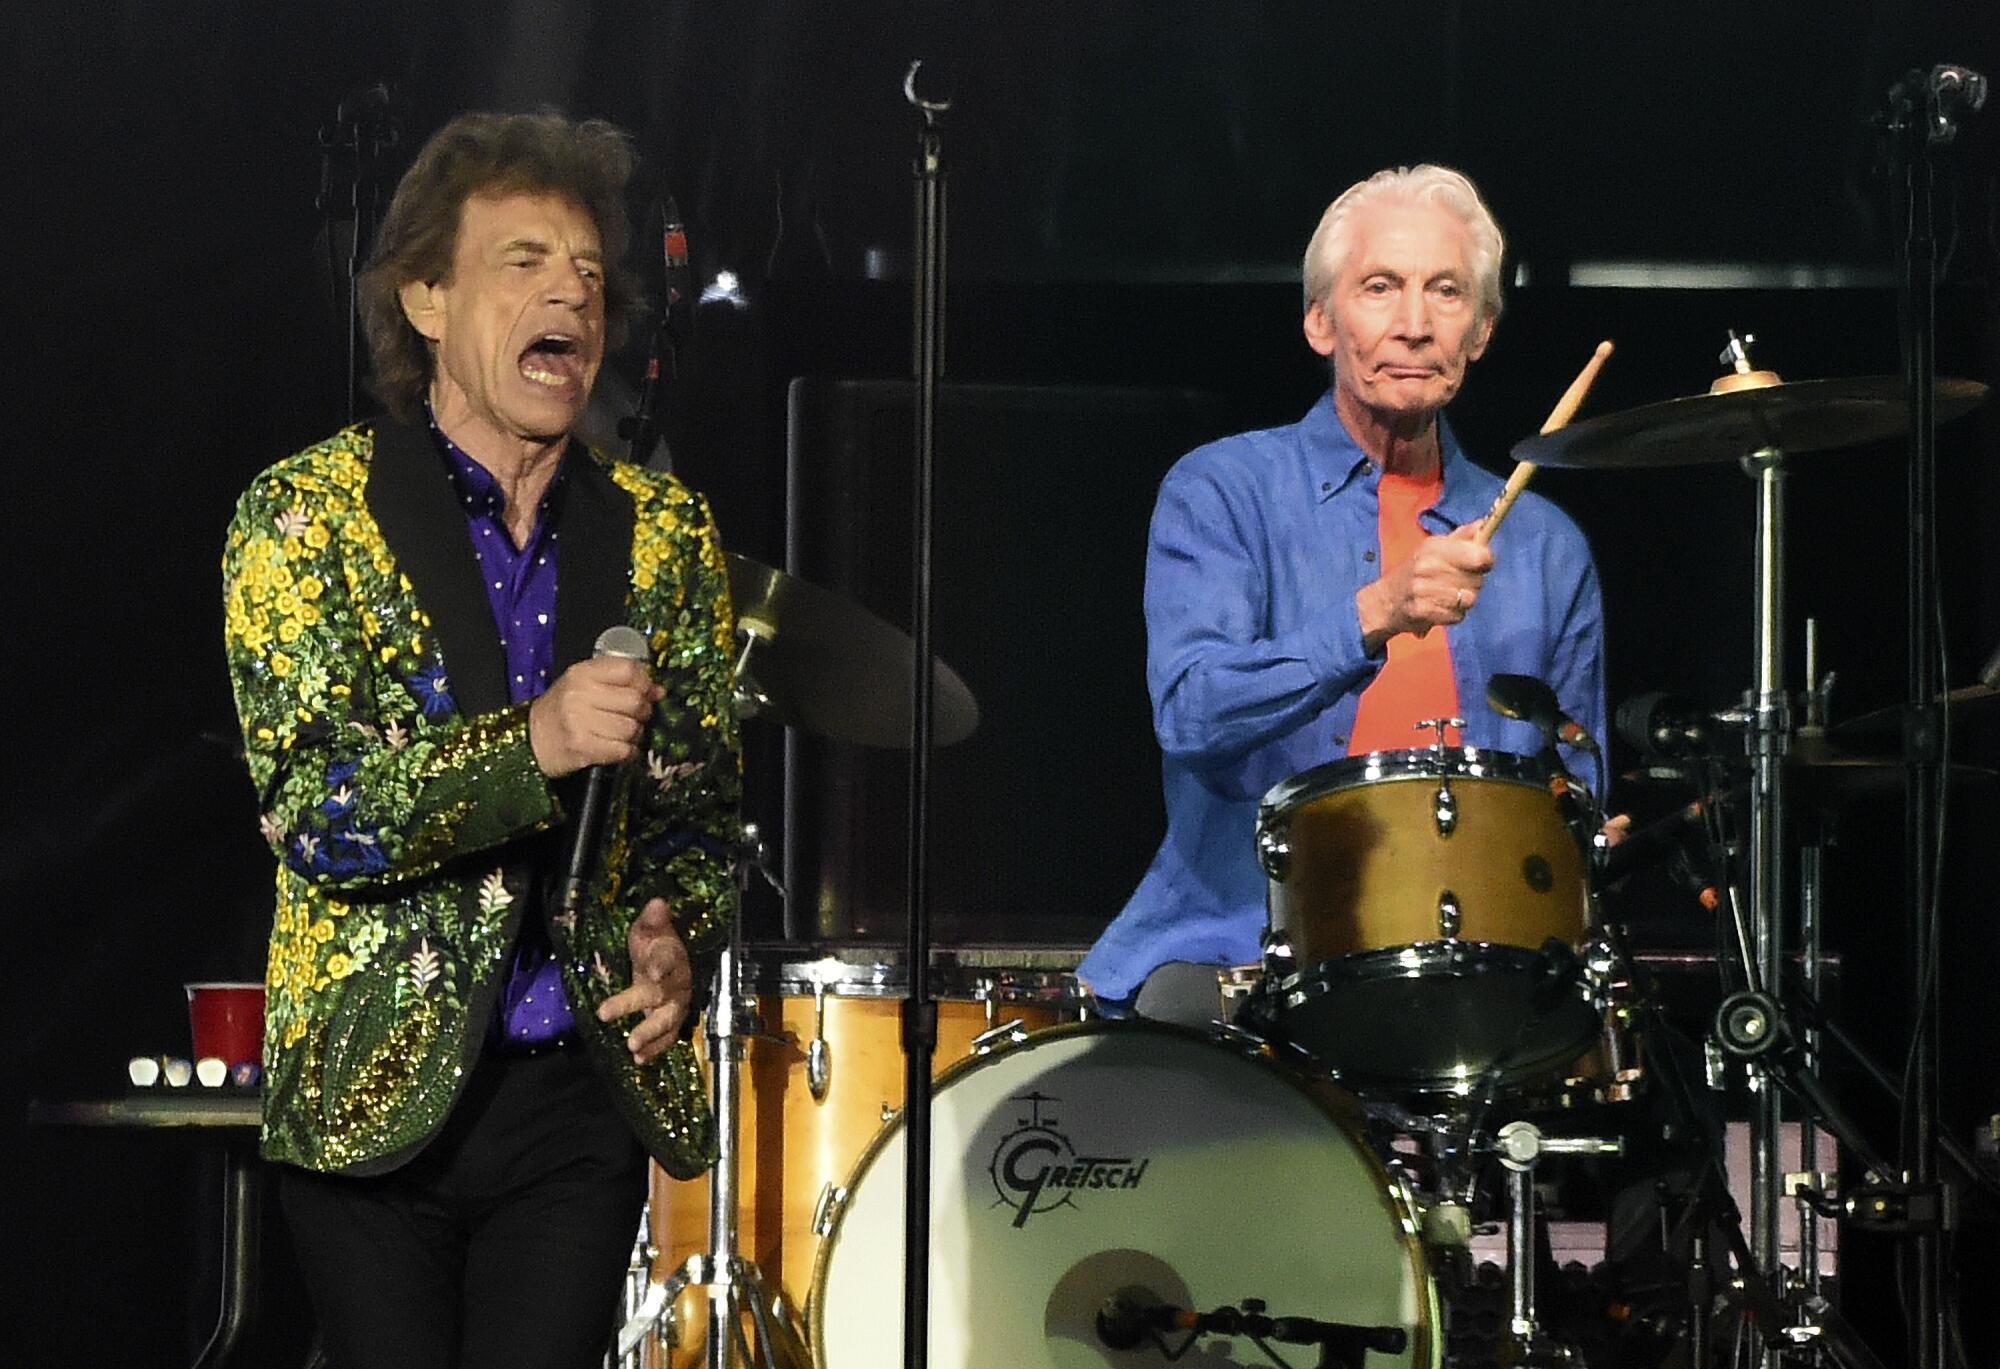 Rolling Stones drummer Charlie Watts, right, performs behind singer Mick Jagger.